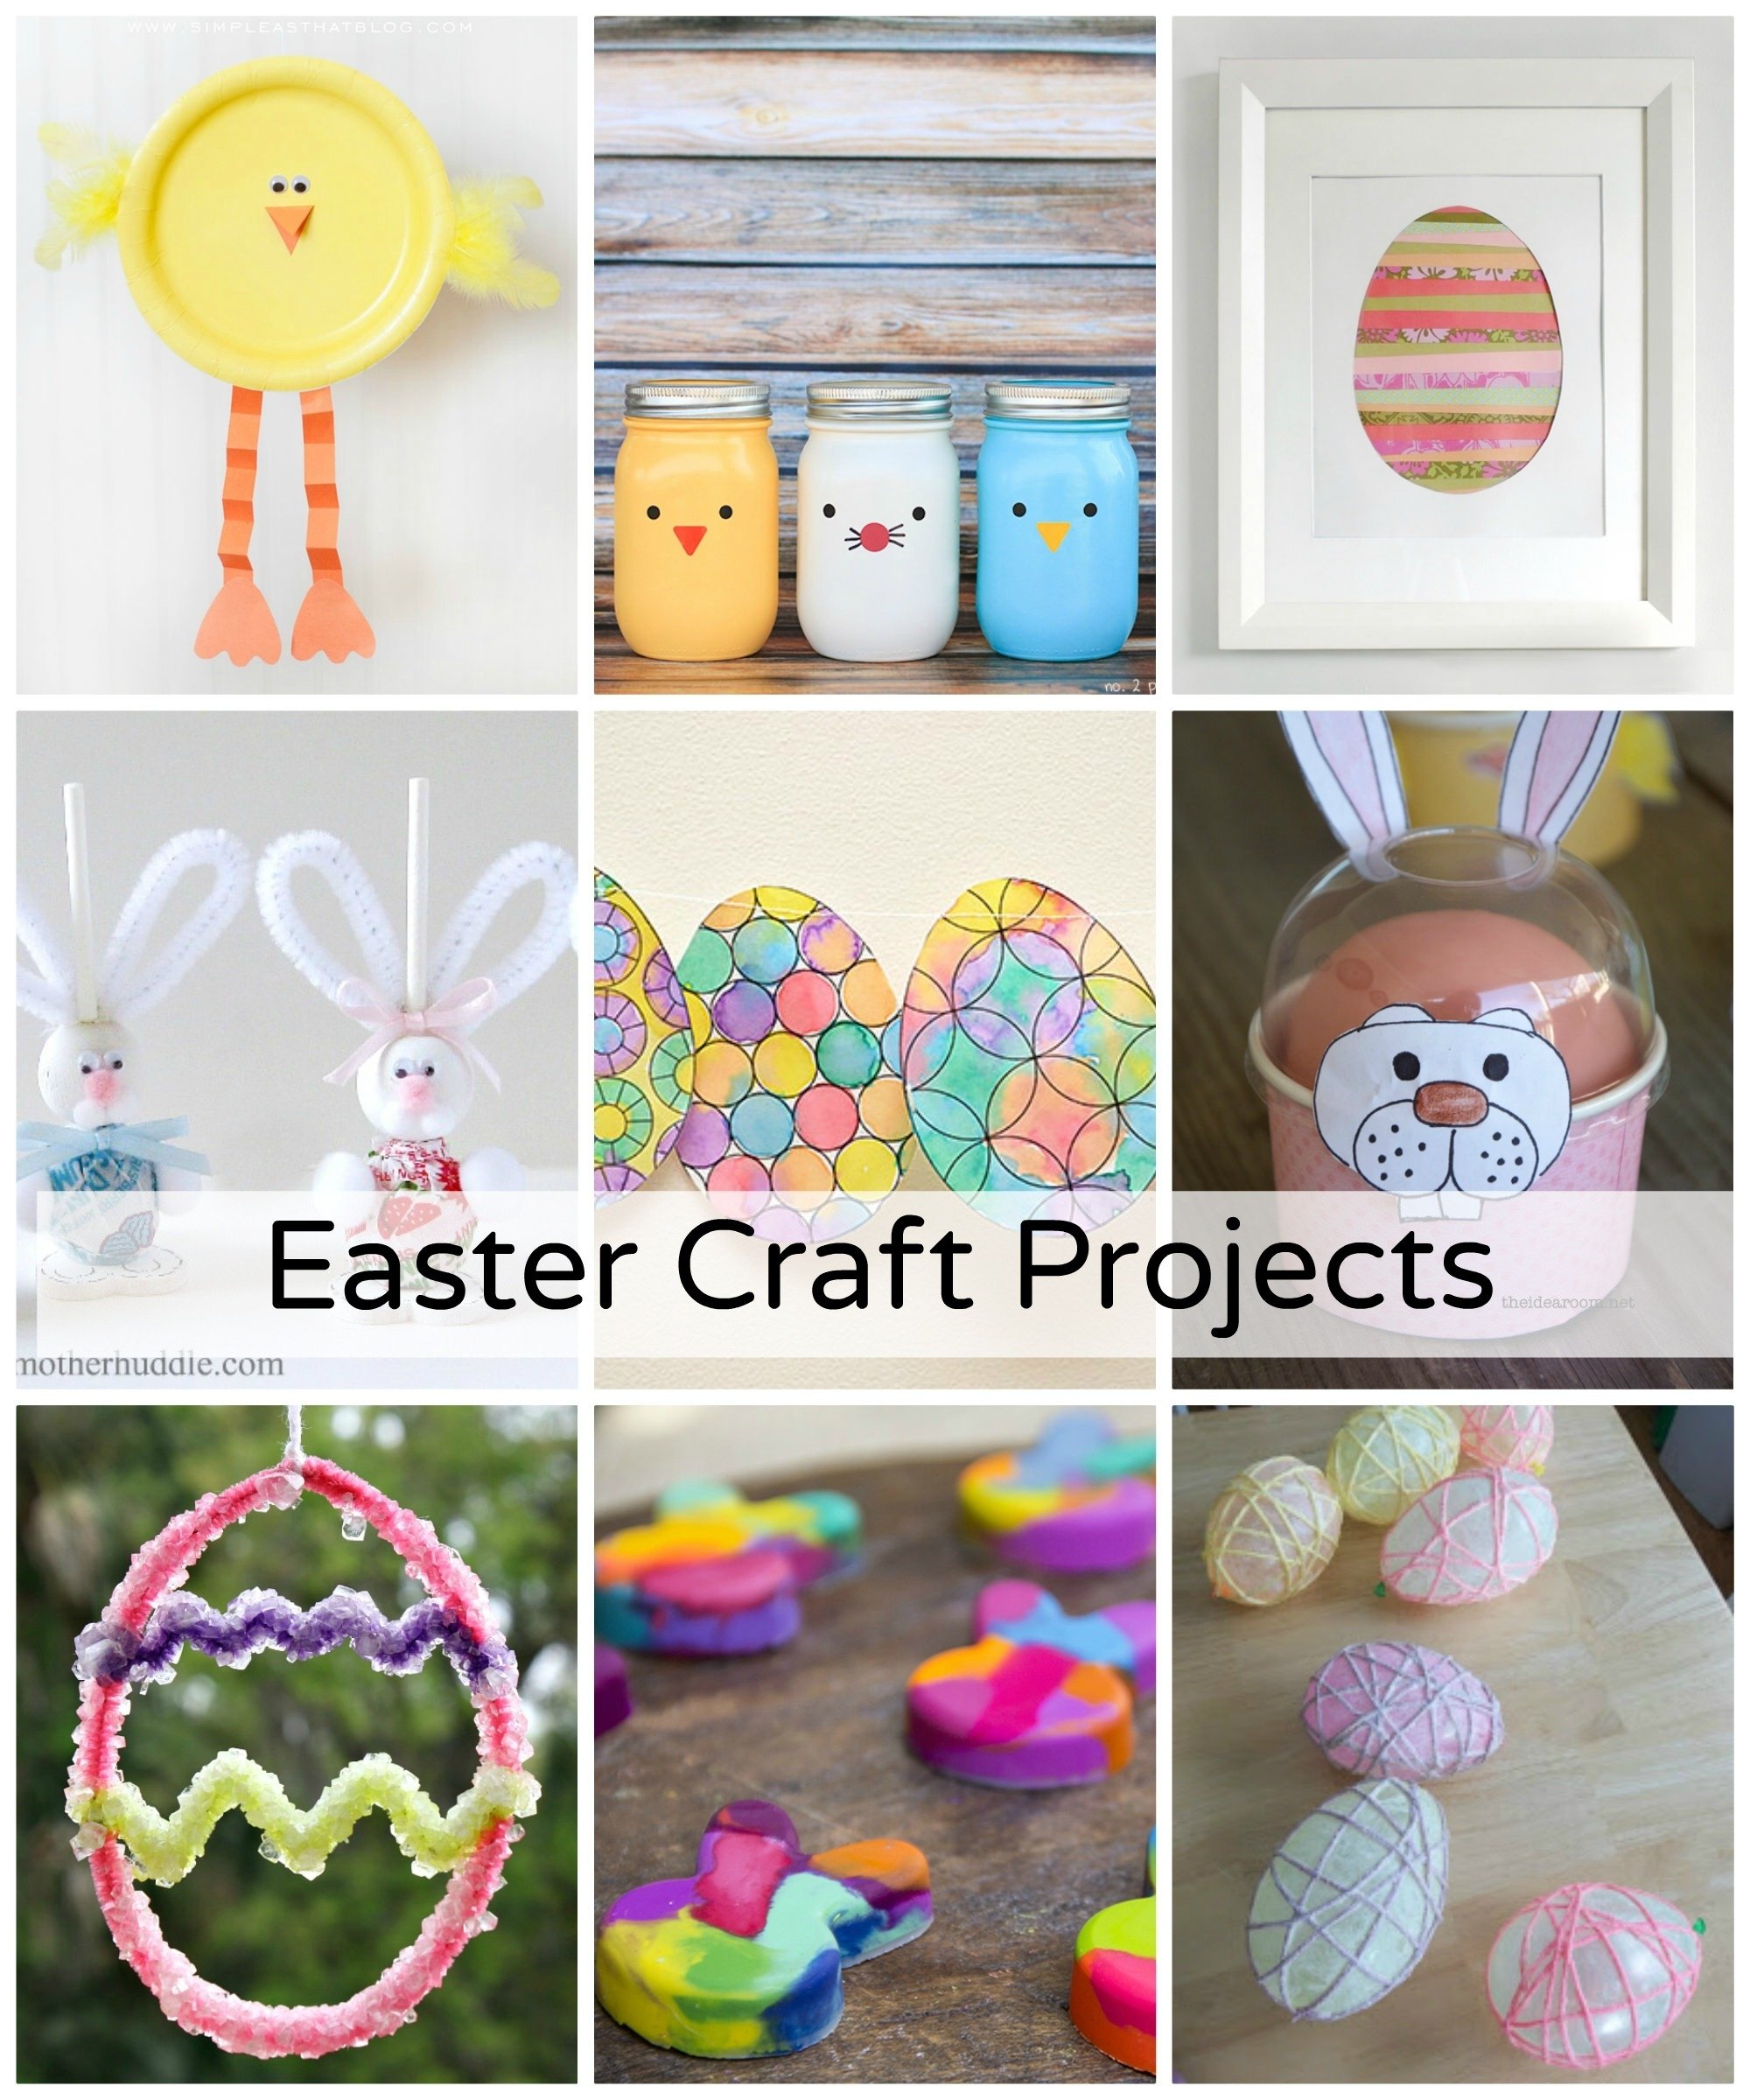 10 Unique Cheap Craft Ideas For Adults diy easy easter craft projects the idea room loversiq 1 2022